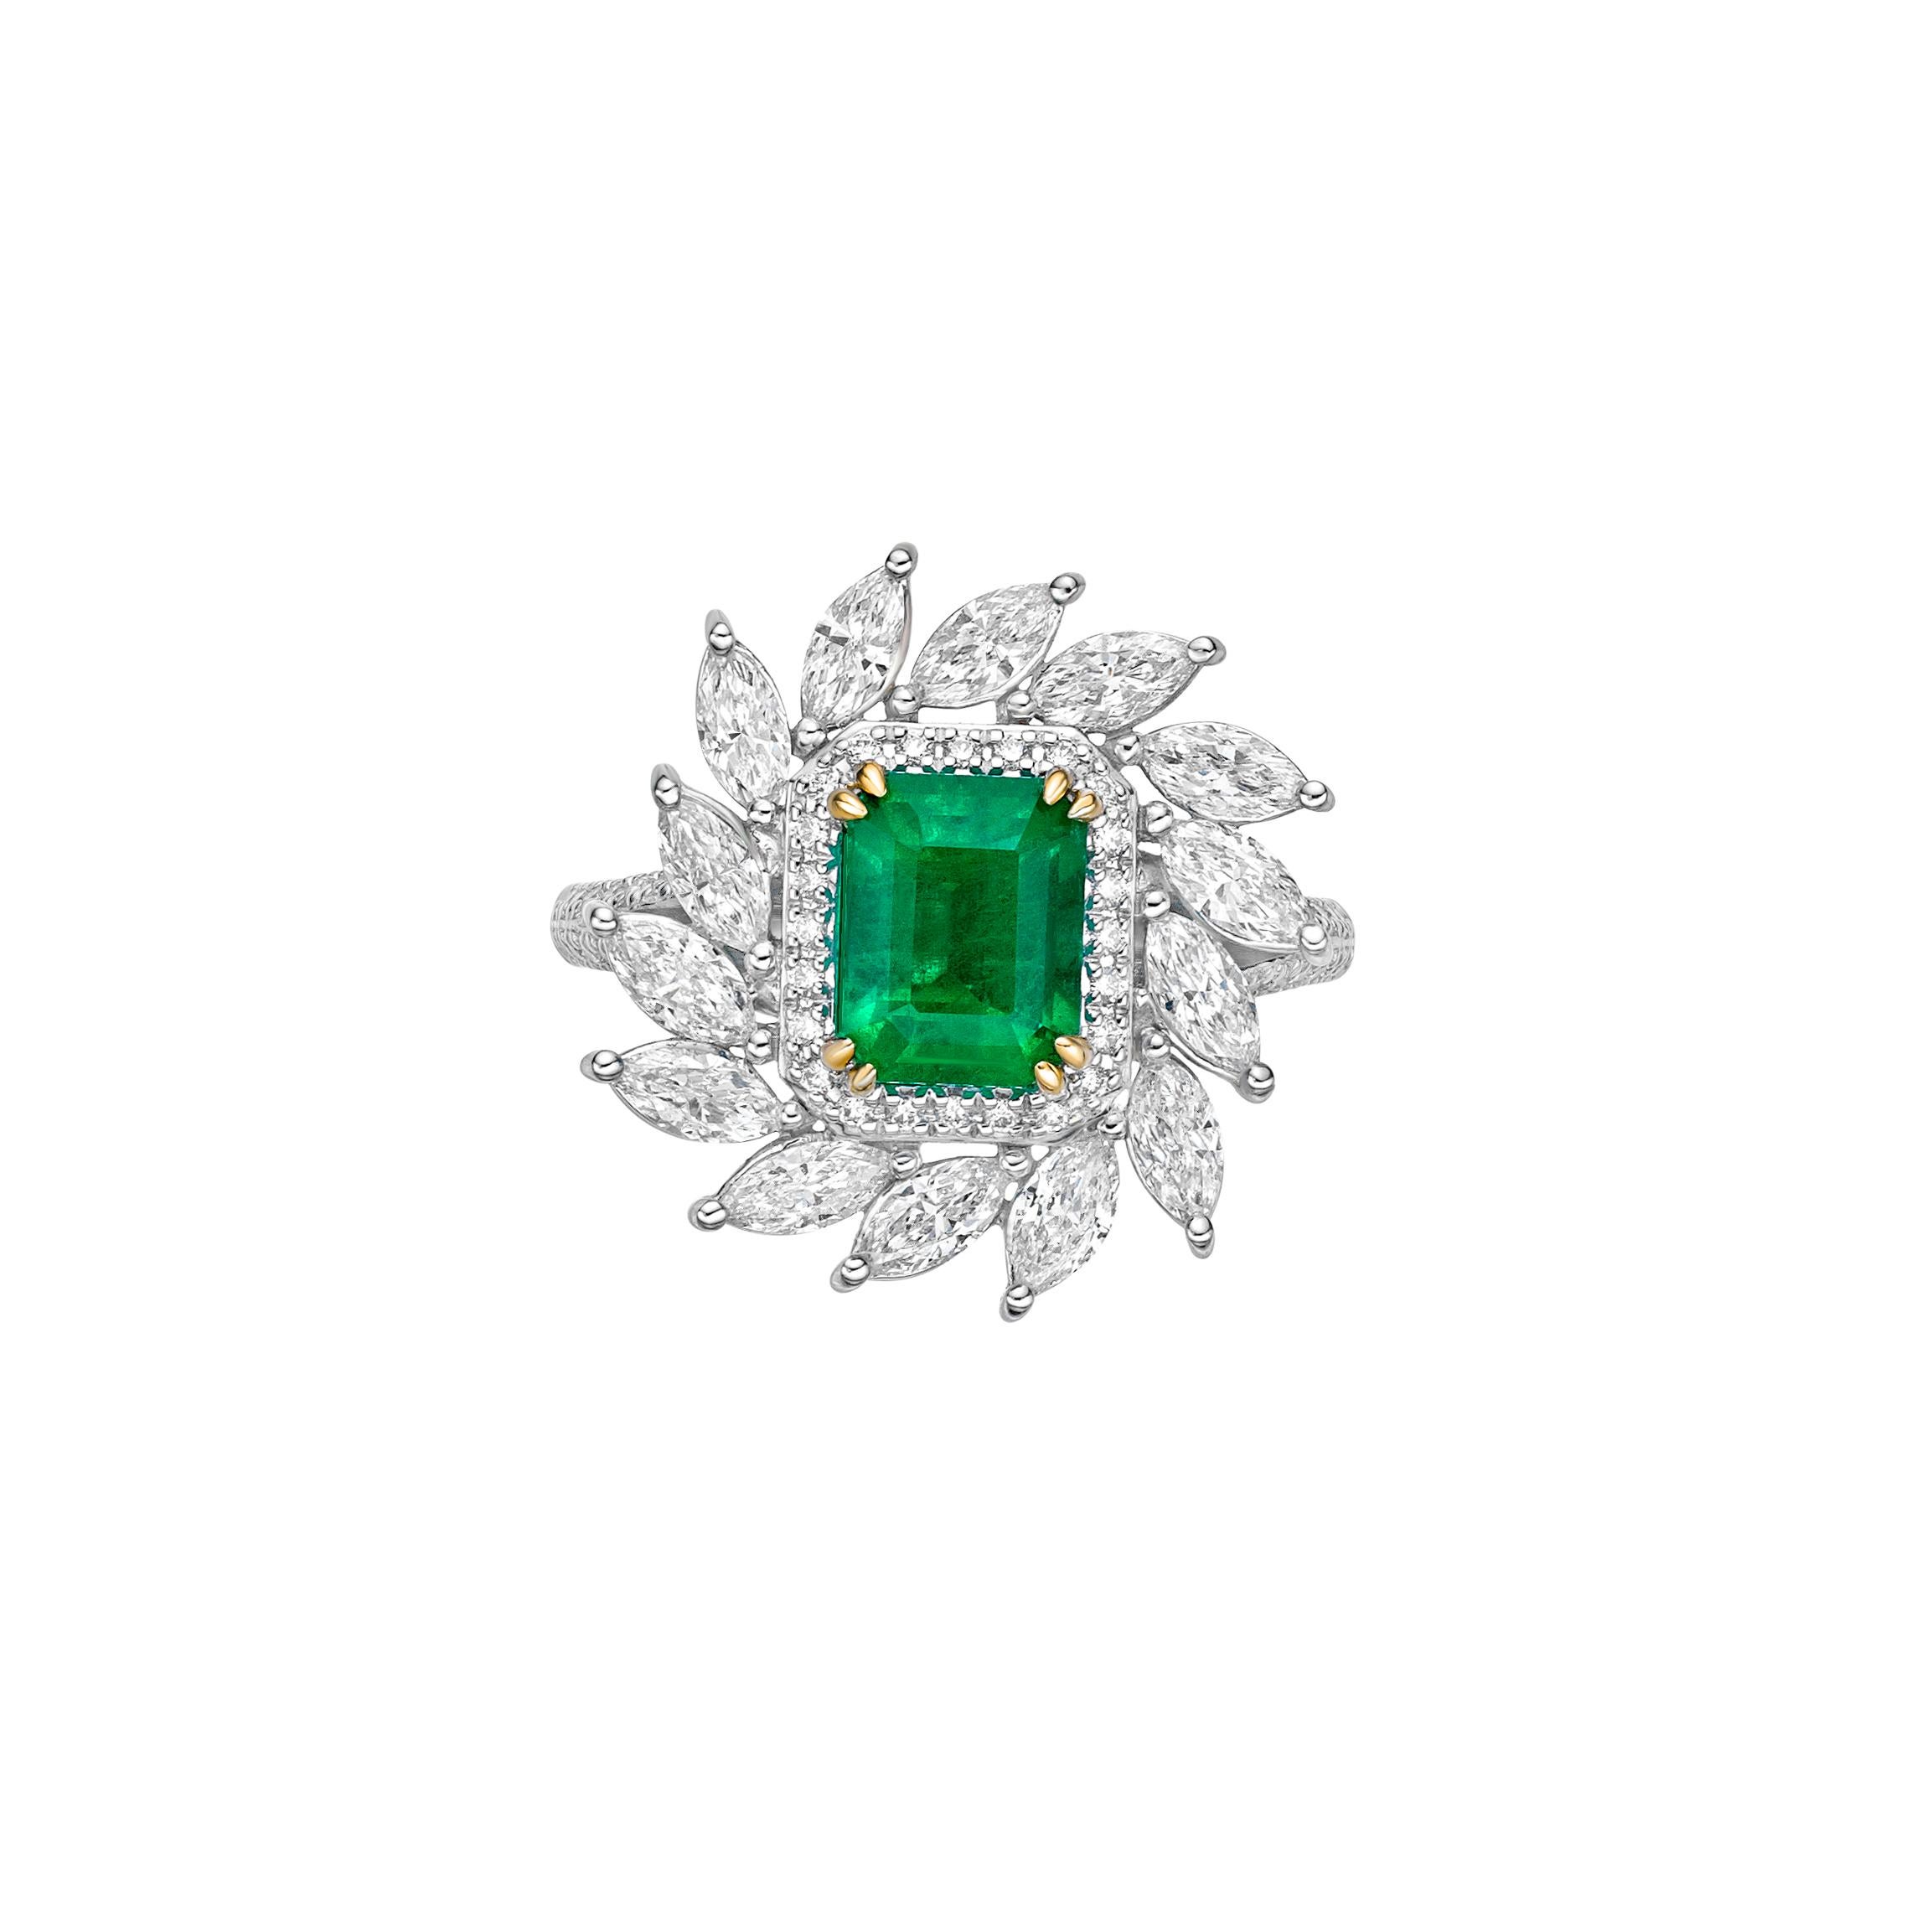 Contemporary 1.65 Carat Sunflower Emerald Bridal Ring in 18KWYG with White Diamond. For Sale